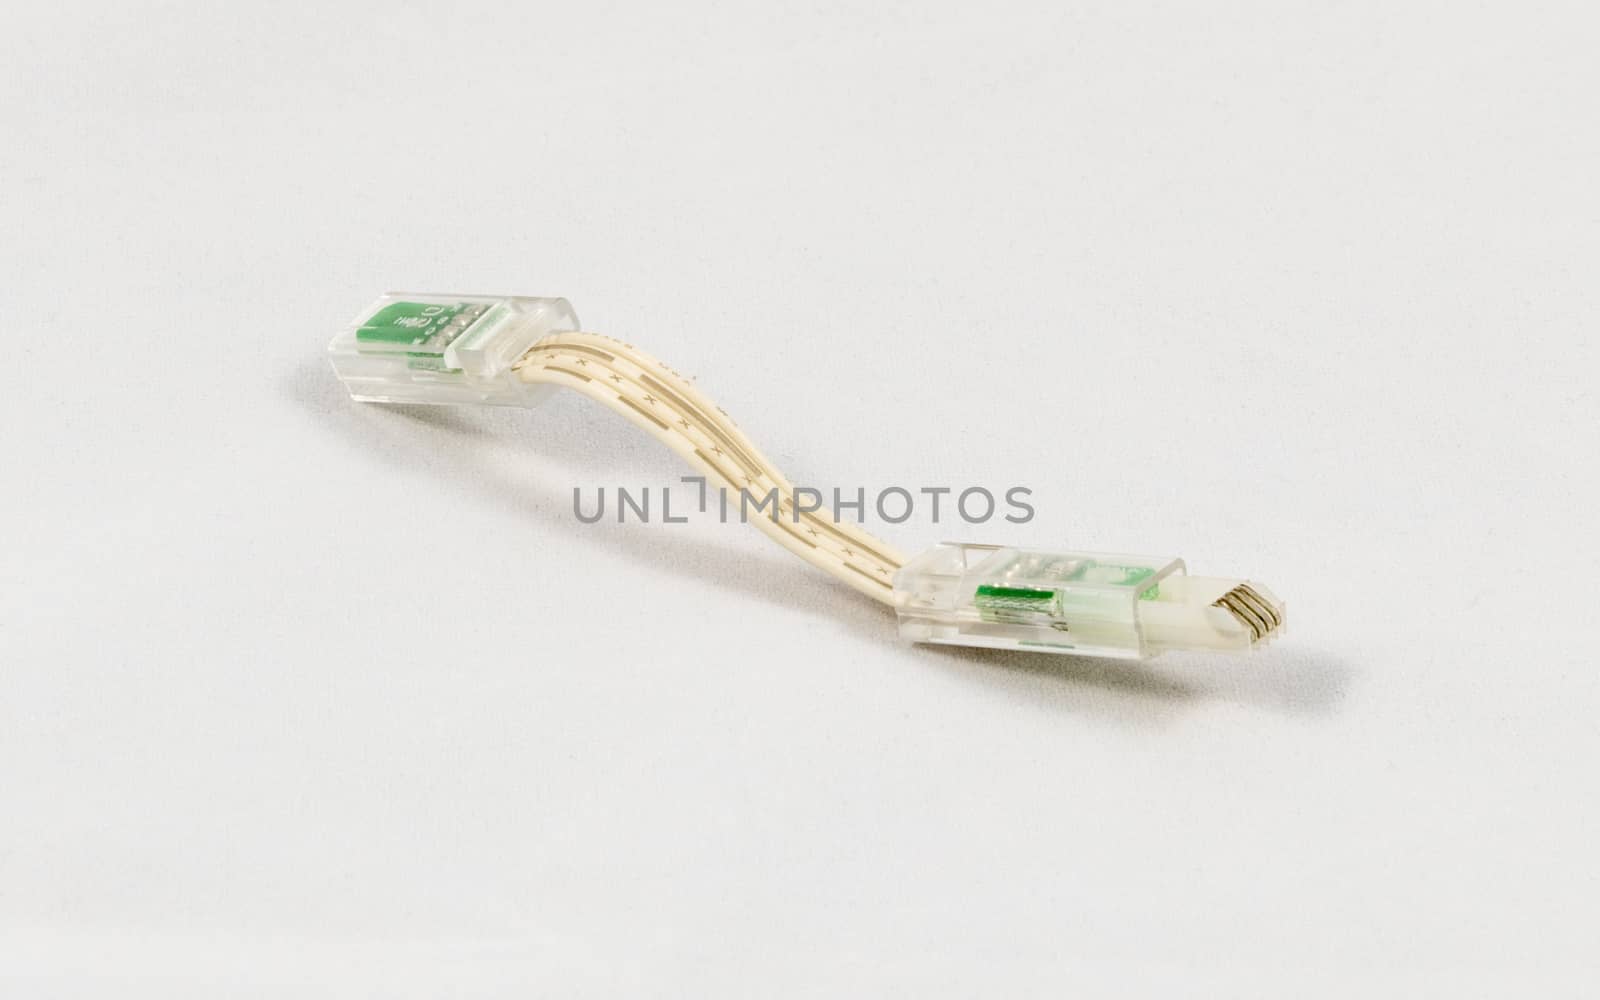 Electronic connector for a led light system, isolated on white background